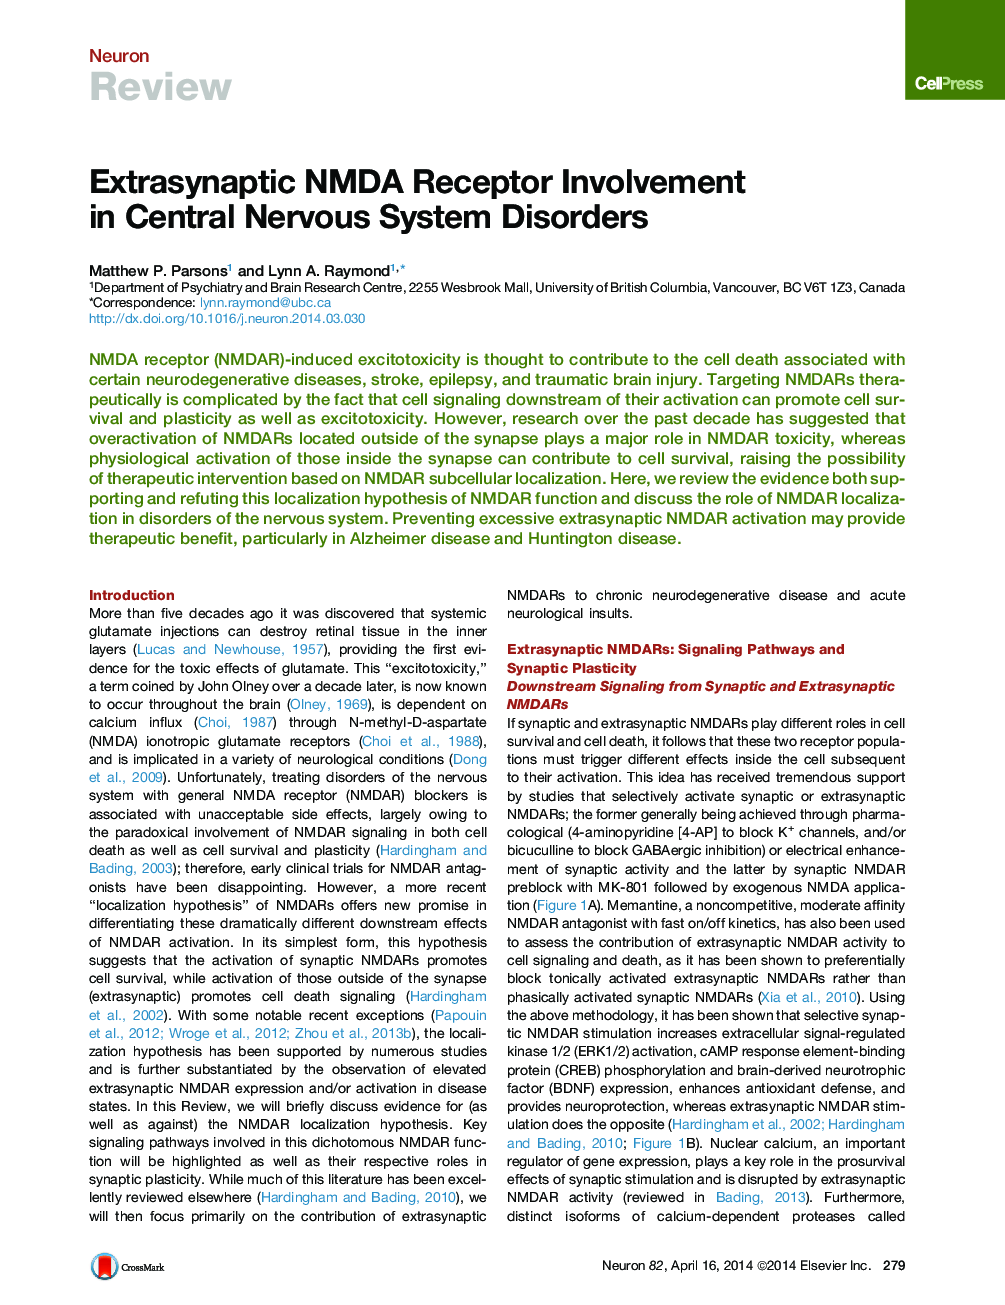 Extrasynaptic NMDA Receptor Involvement in Central Nervous System Disorders